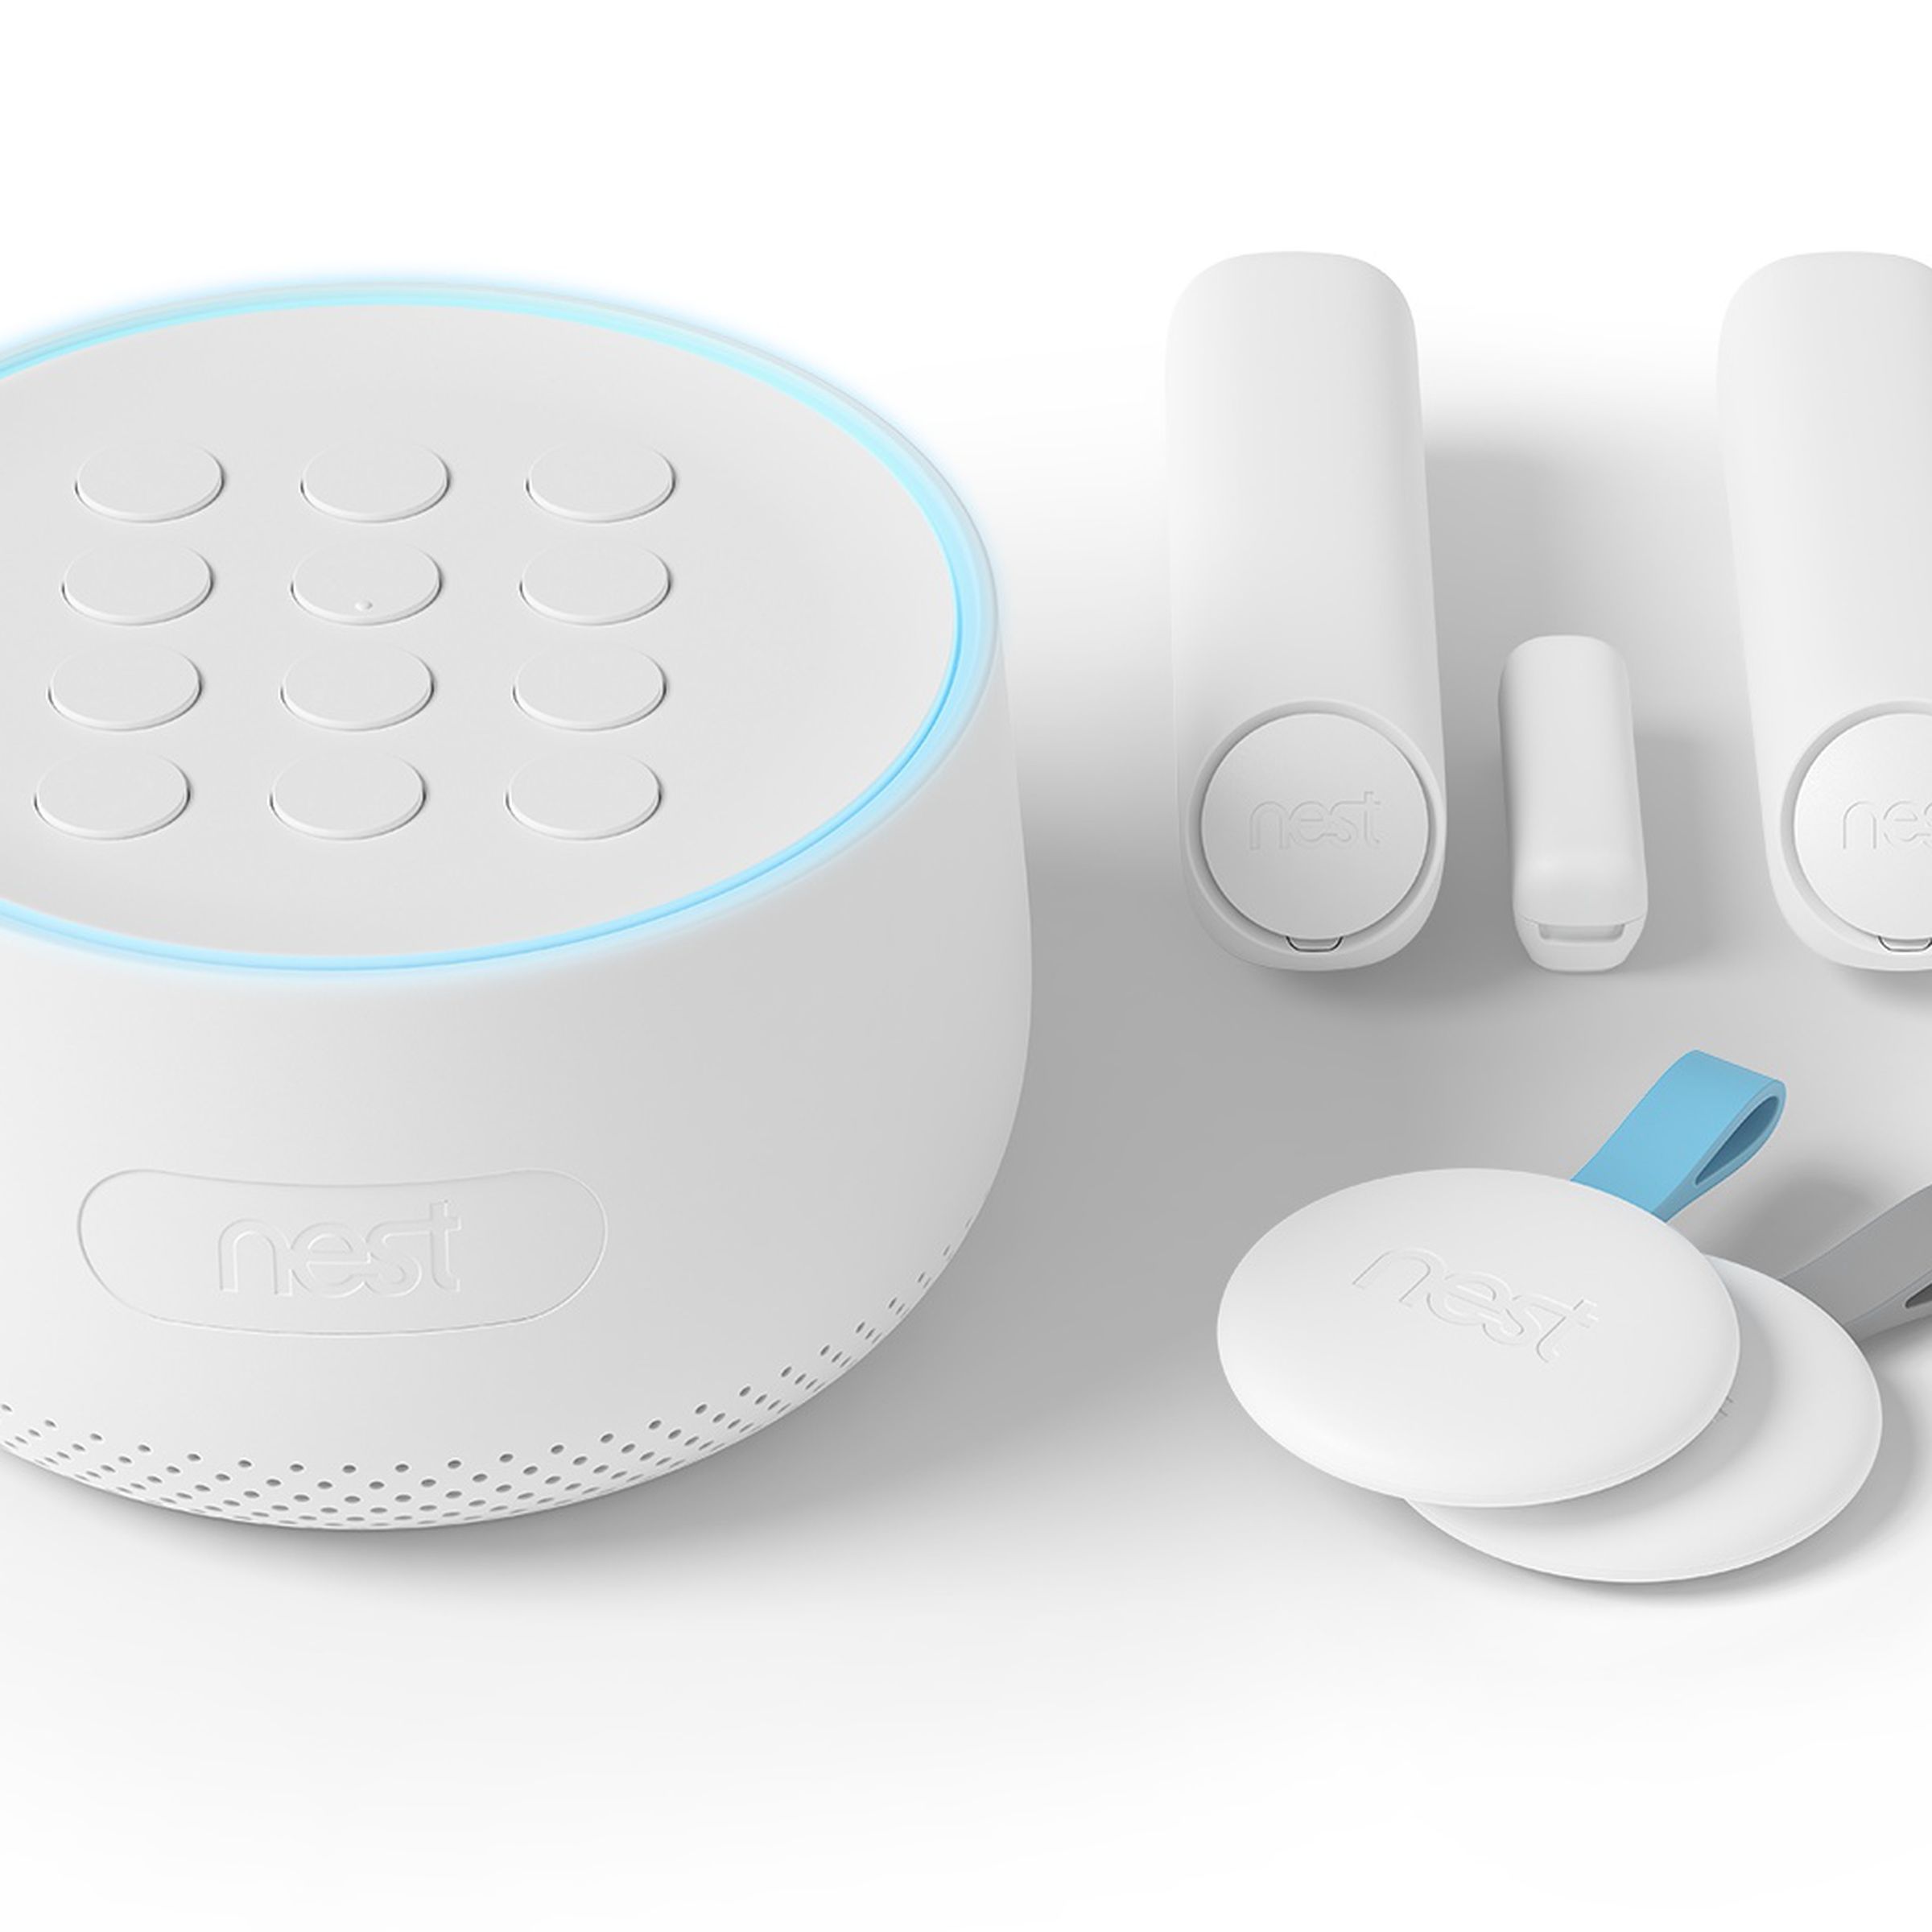 Google’s smart home security system Nest Secure will stop working today, April 8th.